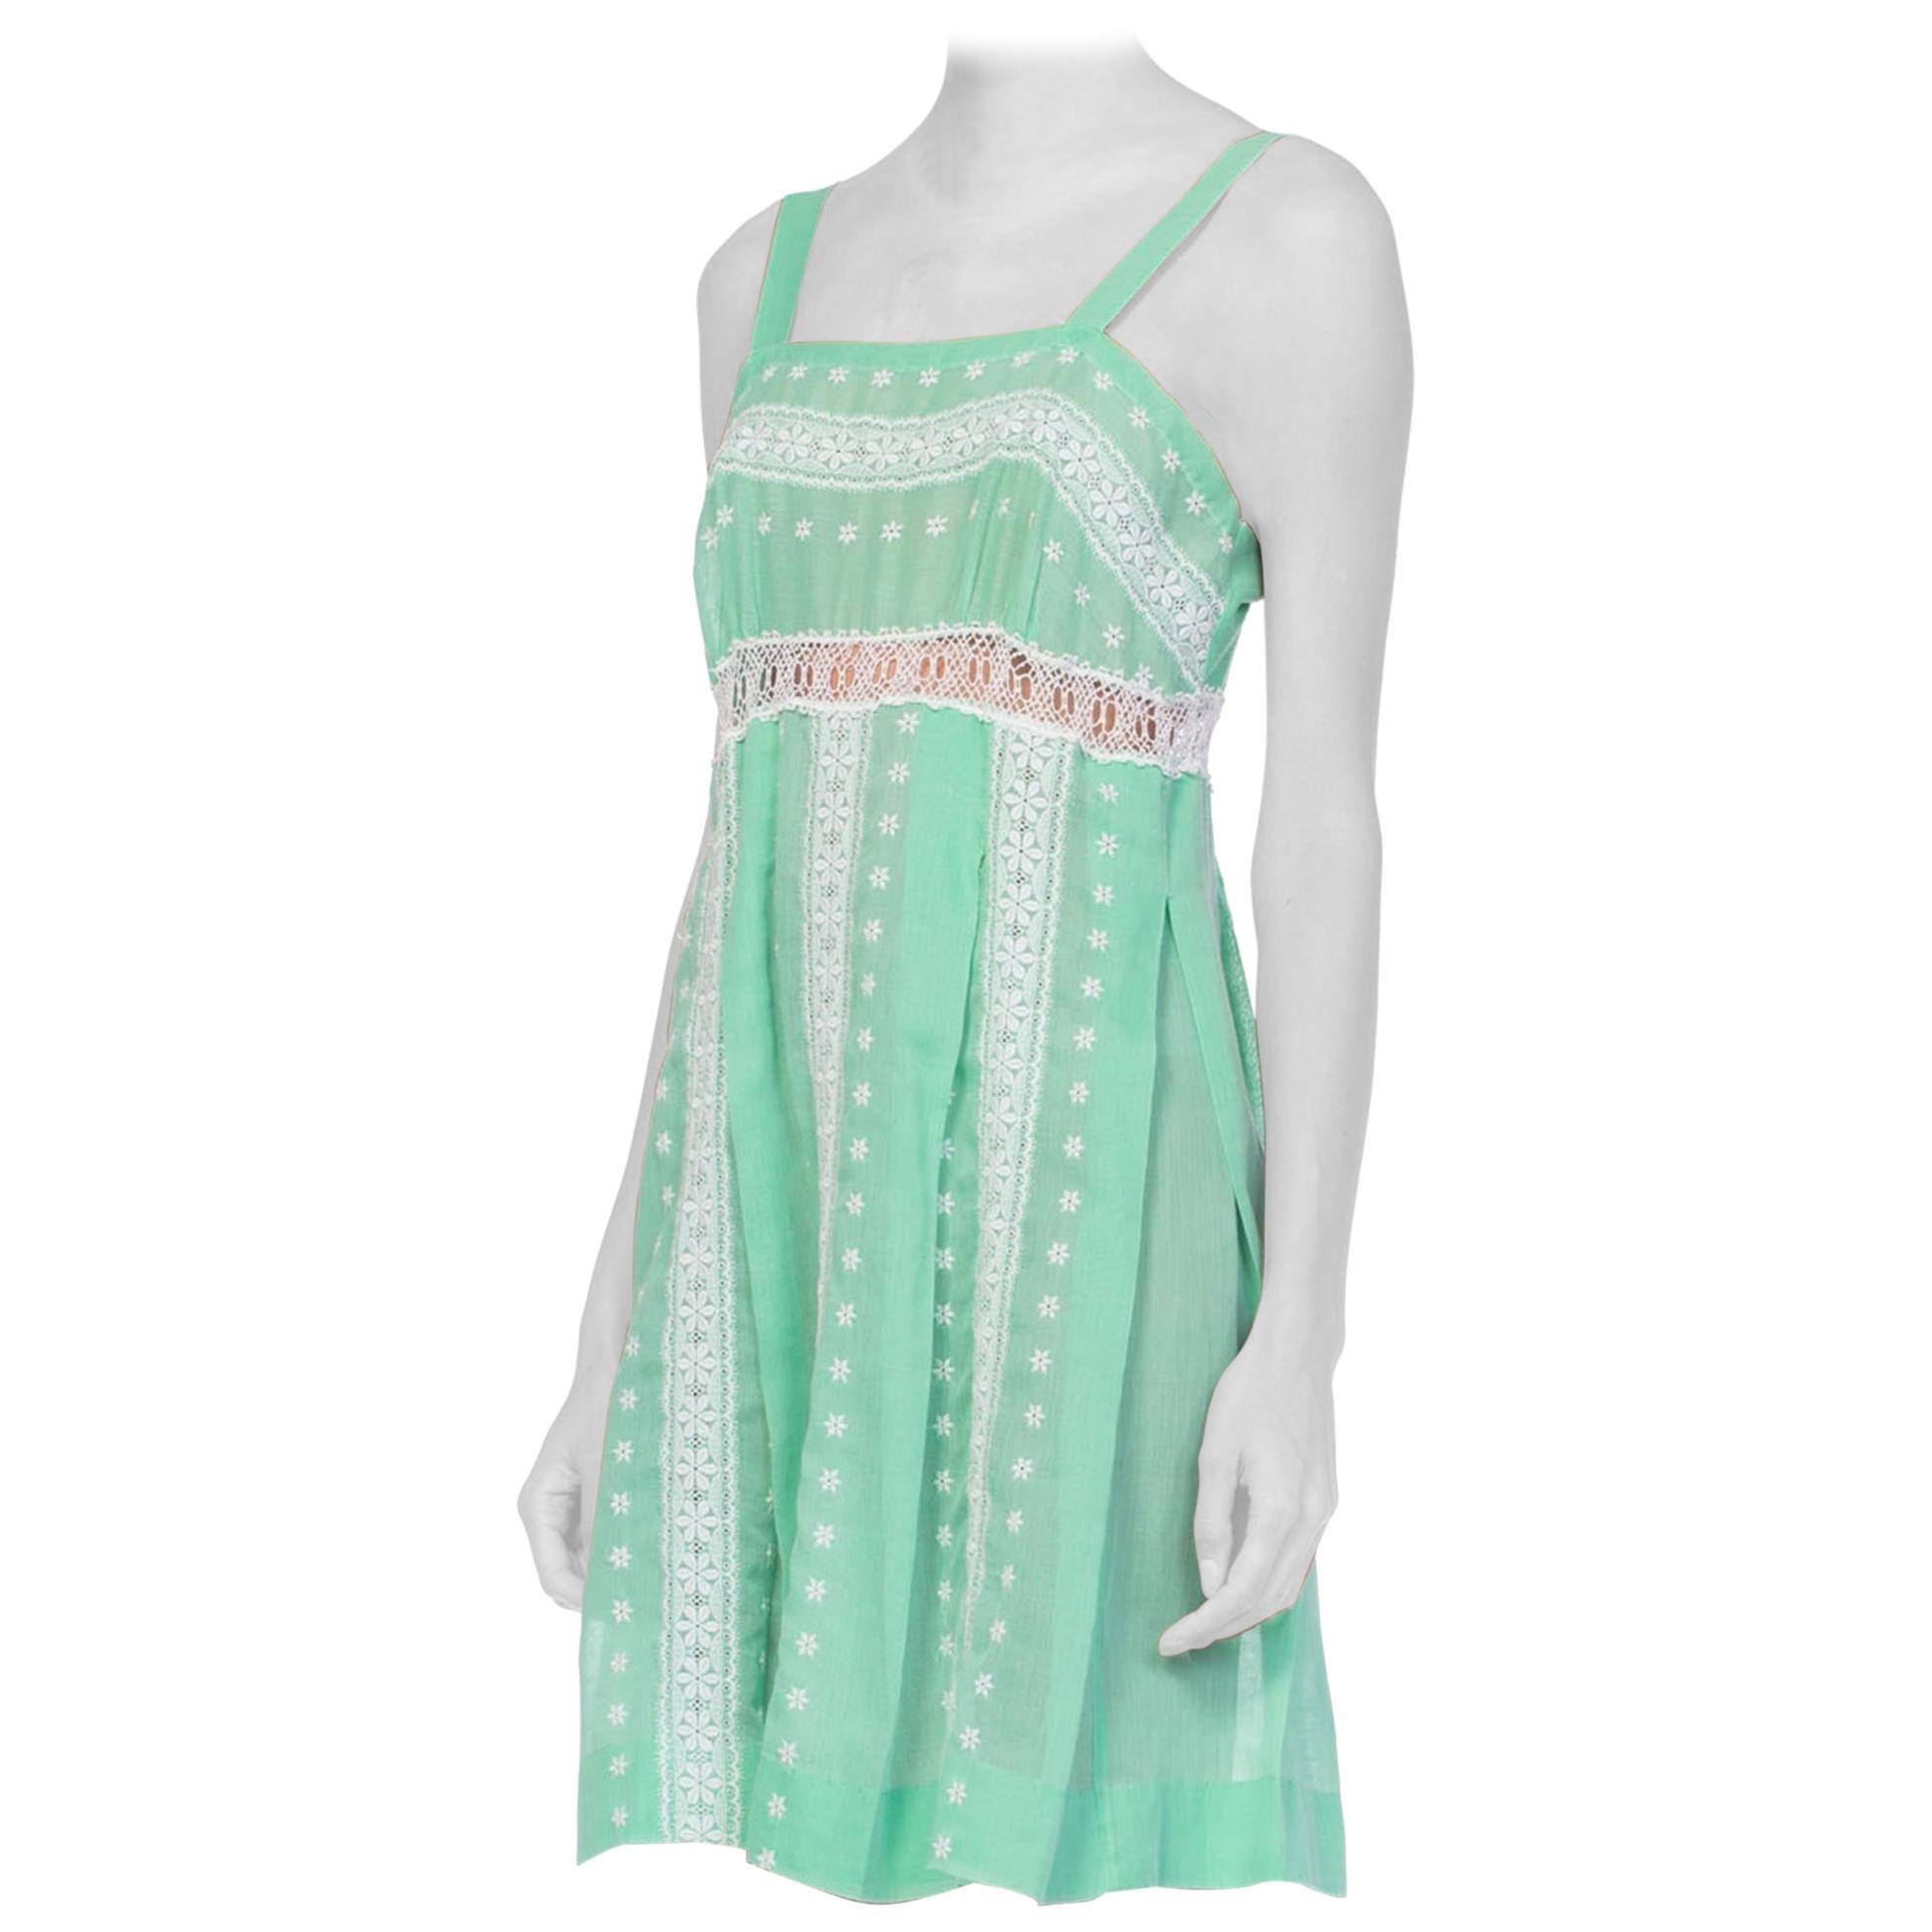 1960S Mint Green Cotton Blend Dress With Eyelet Lace Style Embroidery